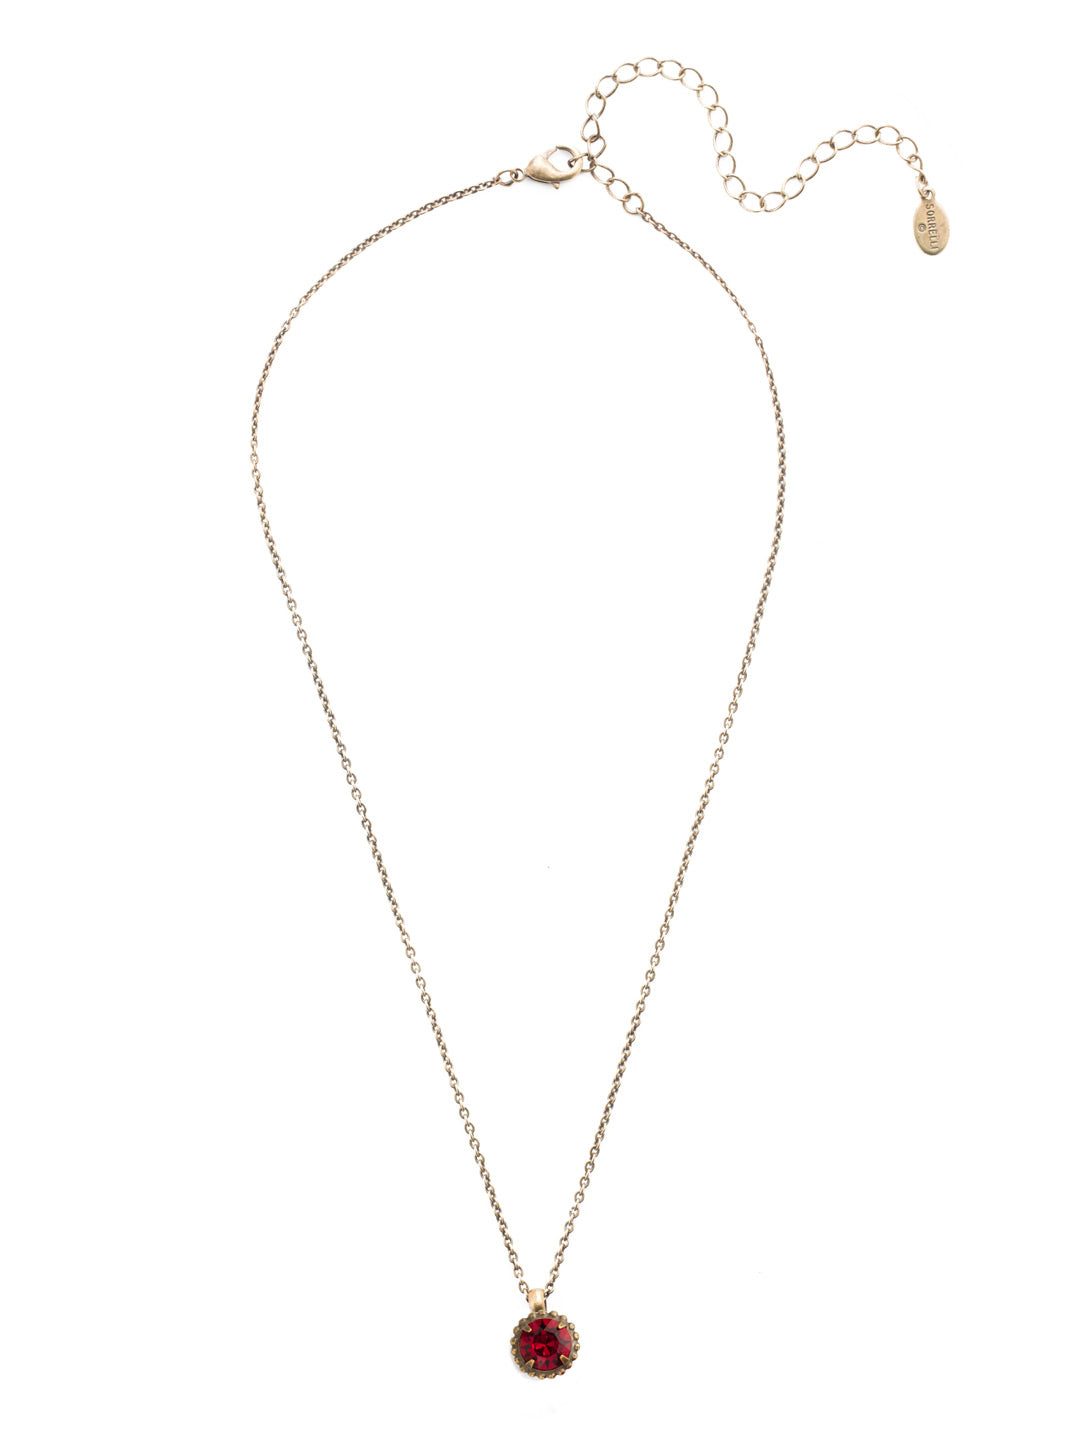 Simplicity Pendant Necklace - NBY38AGSI